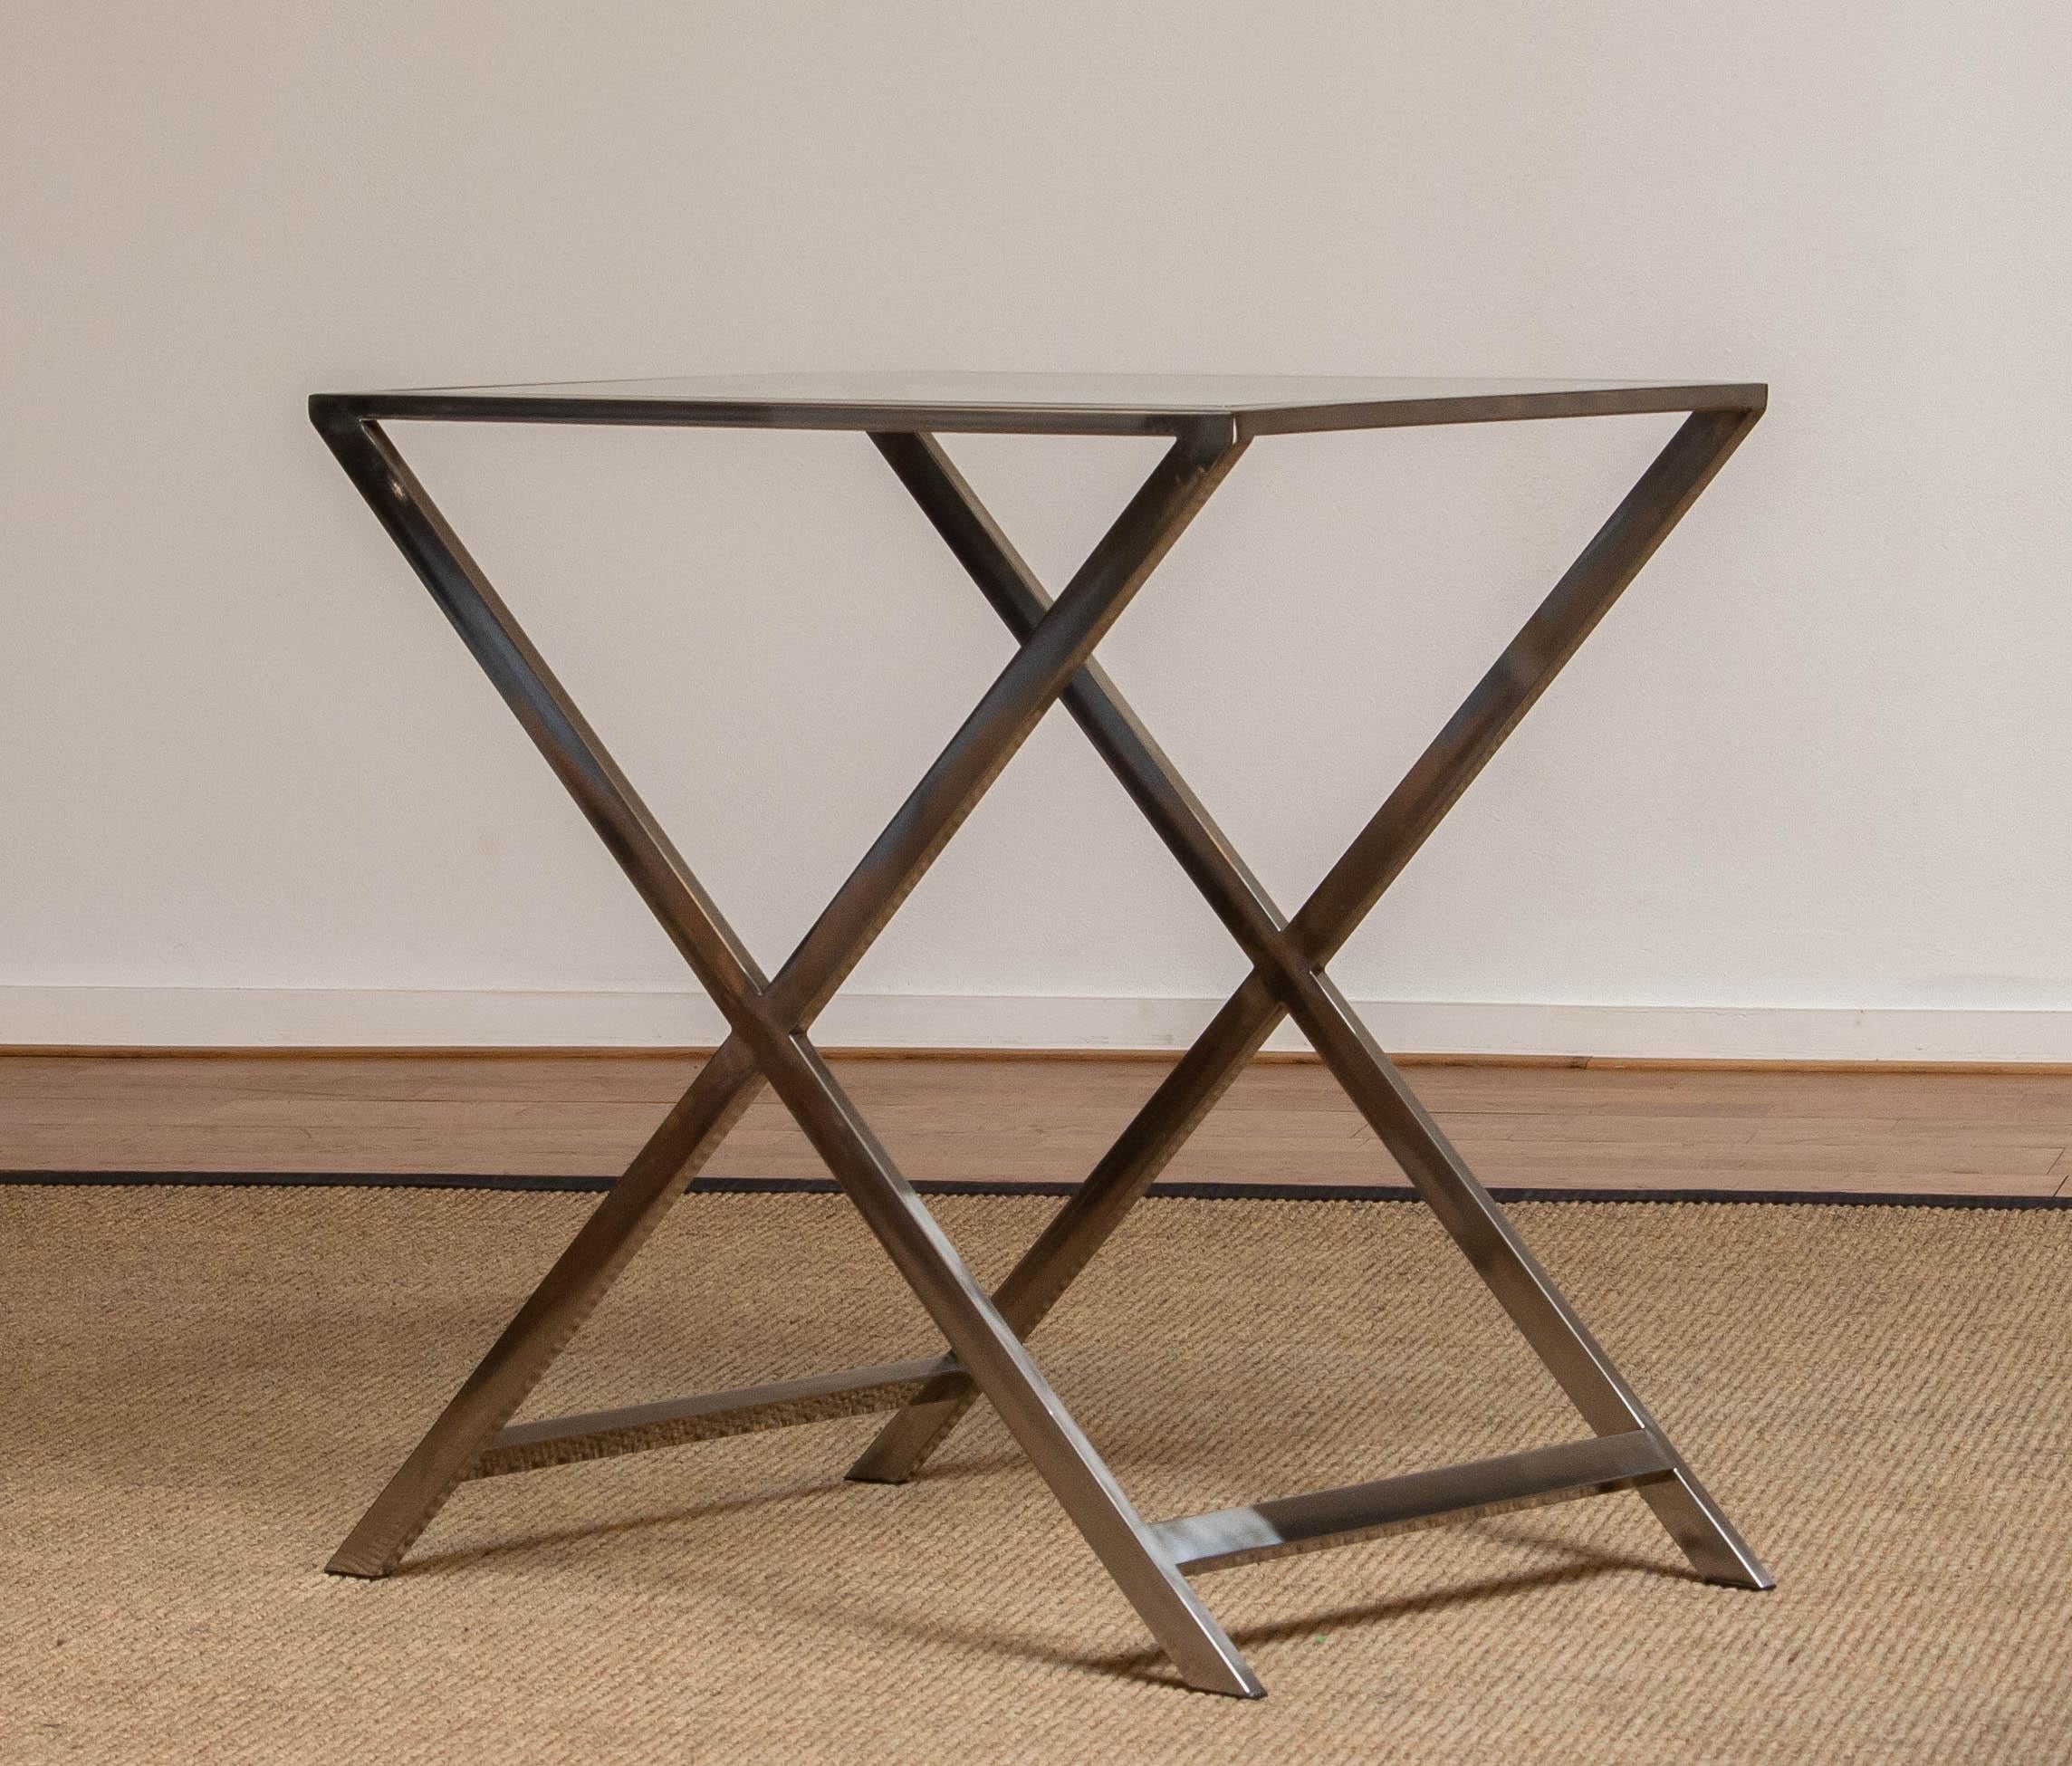 Minimalist 1970's Chrome X / Cross Legs Site Table with Glass Top in Milo Baughman Style For Sale